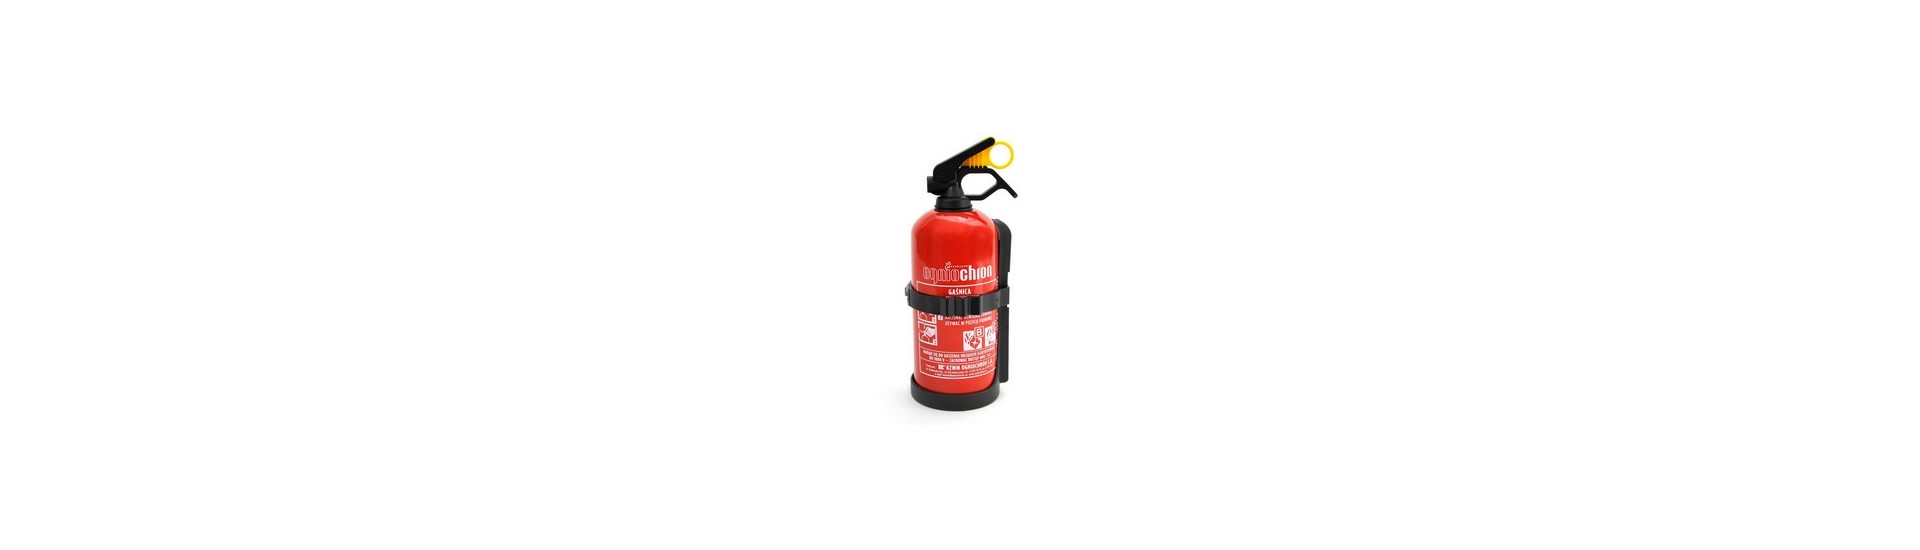 Extinguisher at best car prices without a permit